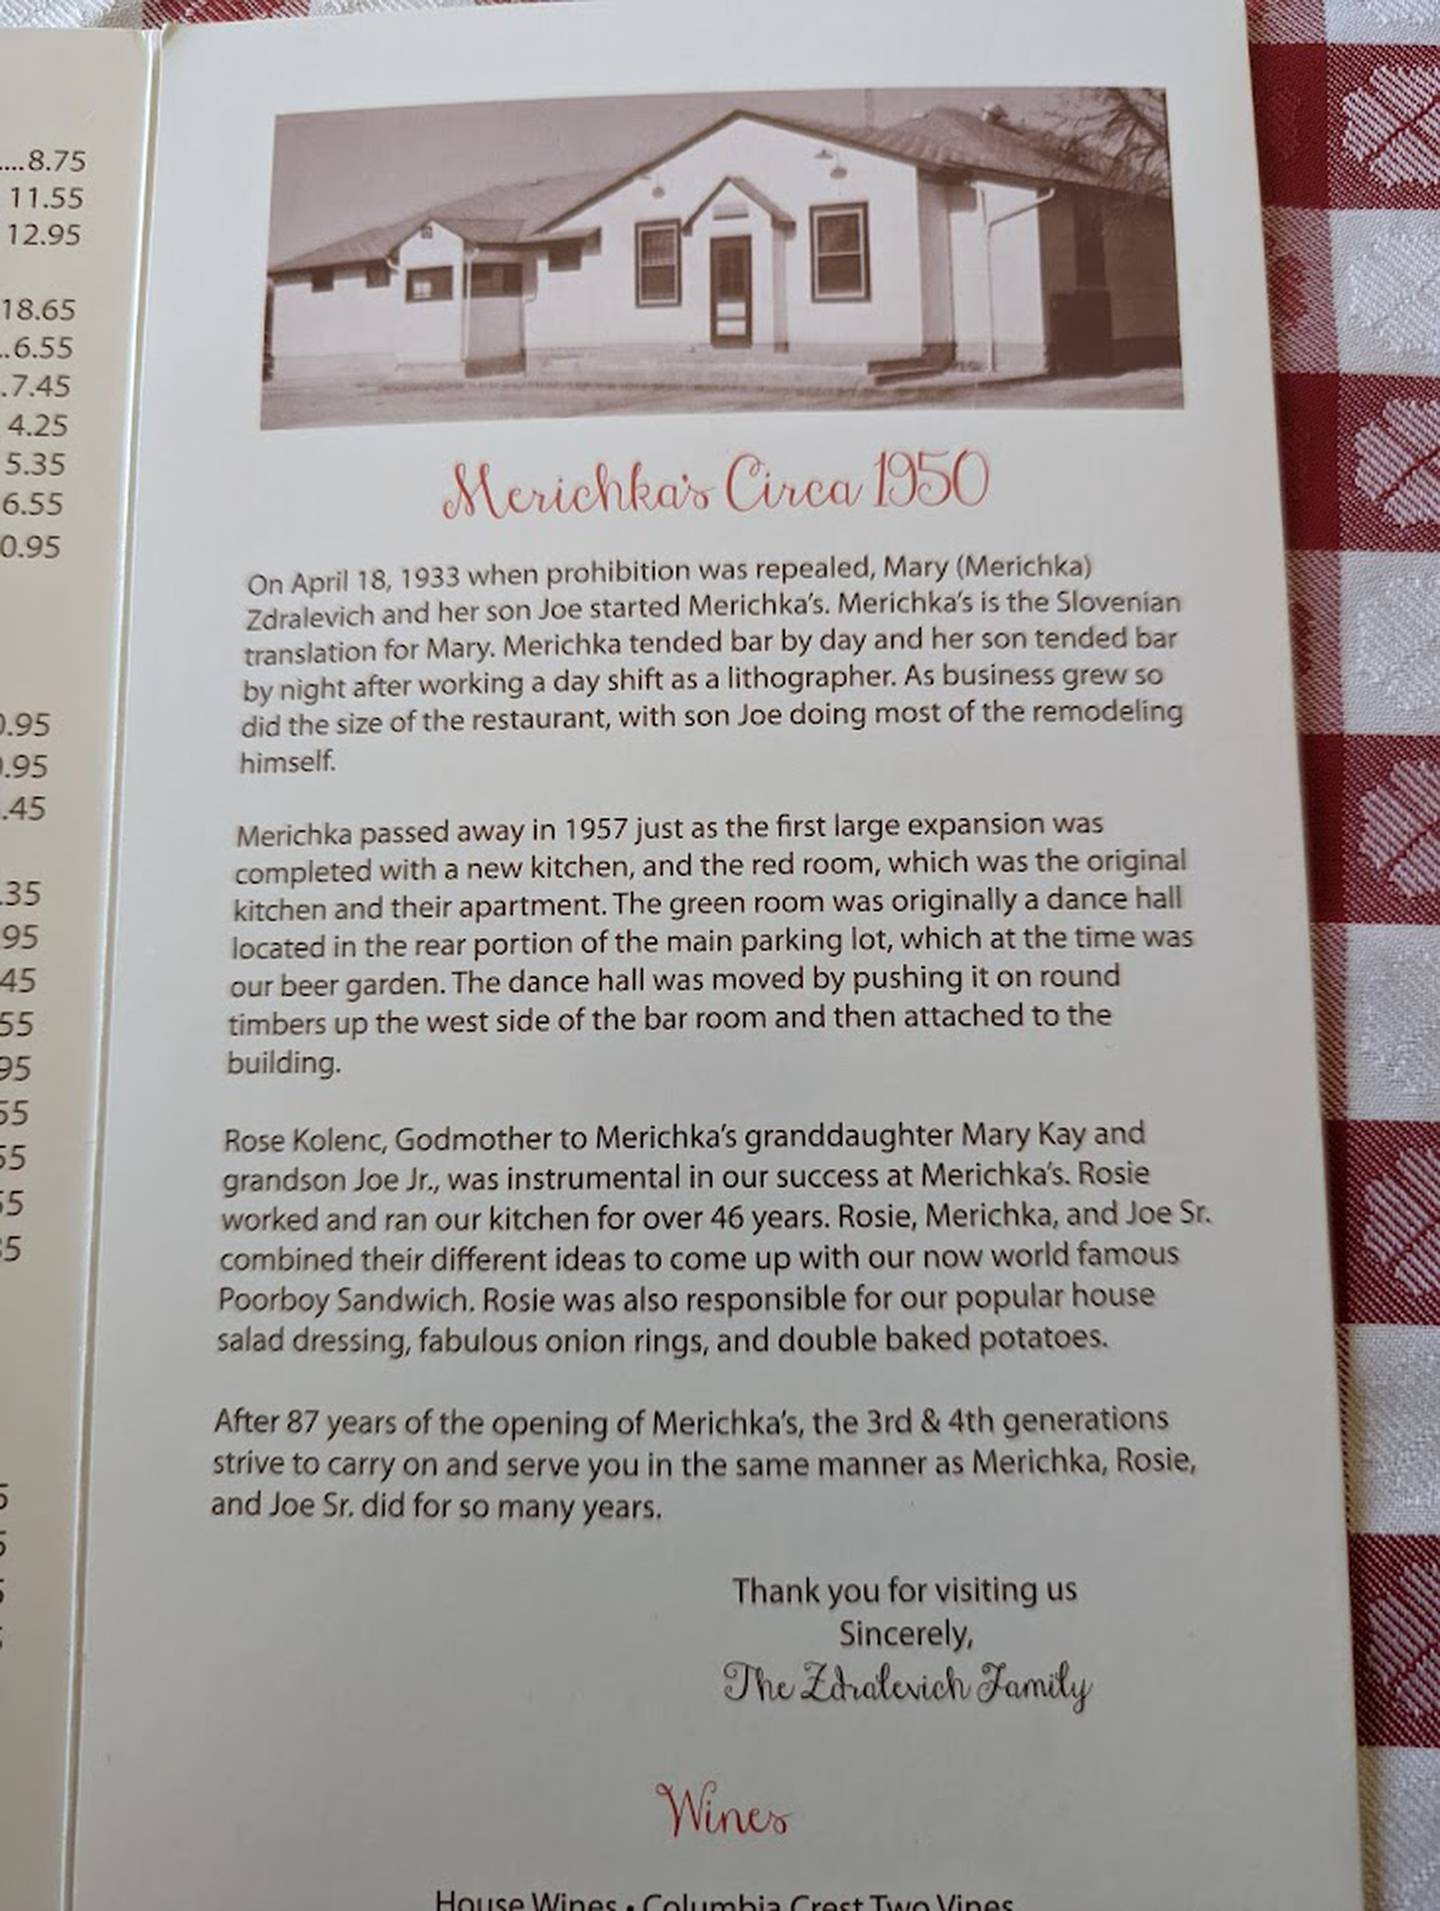 Mary (Merichka) Zdralevich and her son Joe opened Merichka's on April 18, 1933, and the Zdralevich family still owns and operates the Crest Hill Restaurant.  Merichka's is known for its Poorboy Garlic Butter Sandwich.